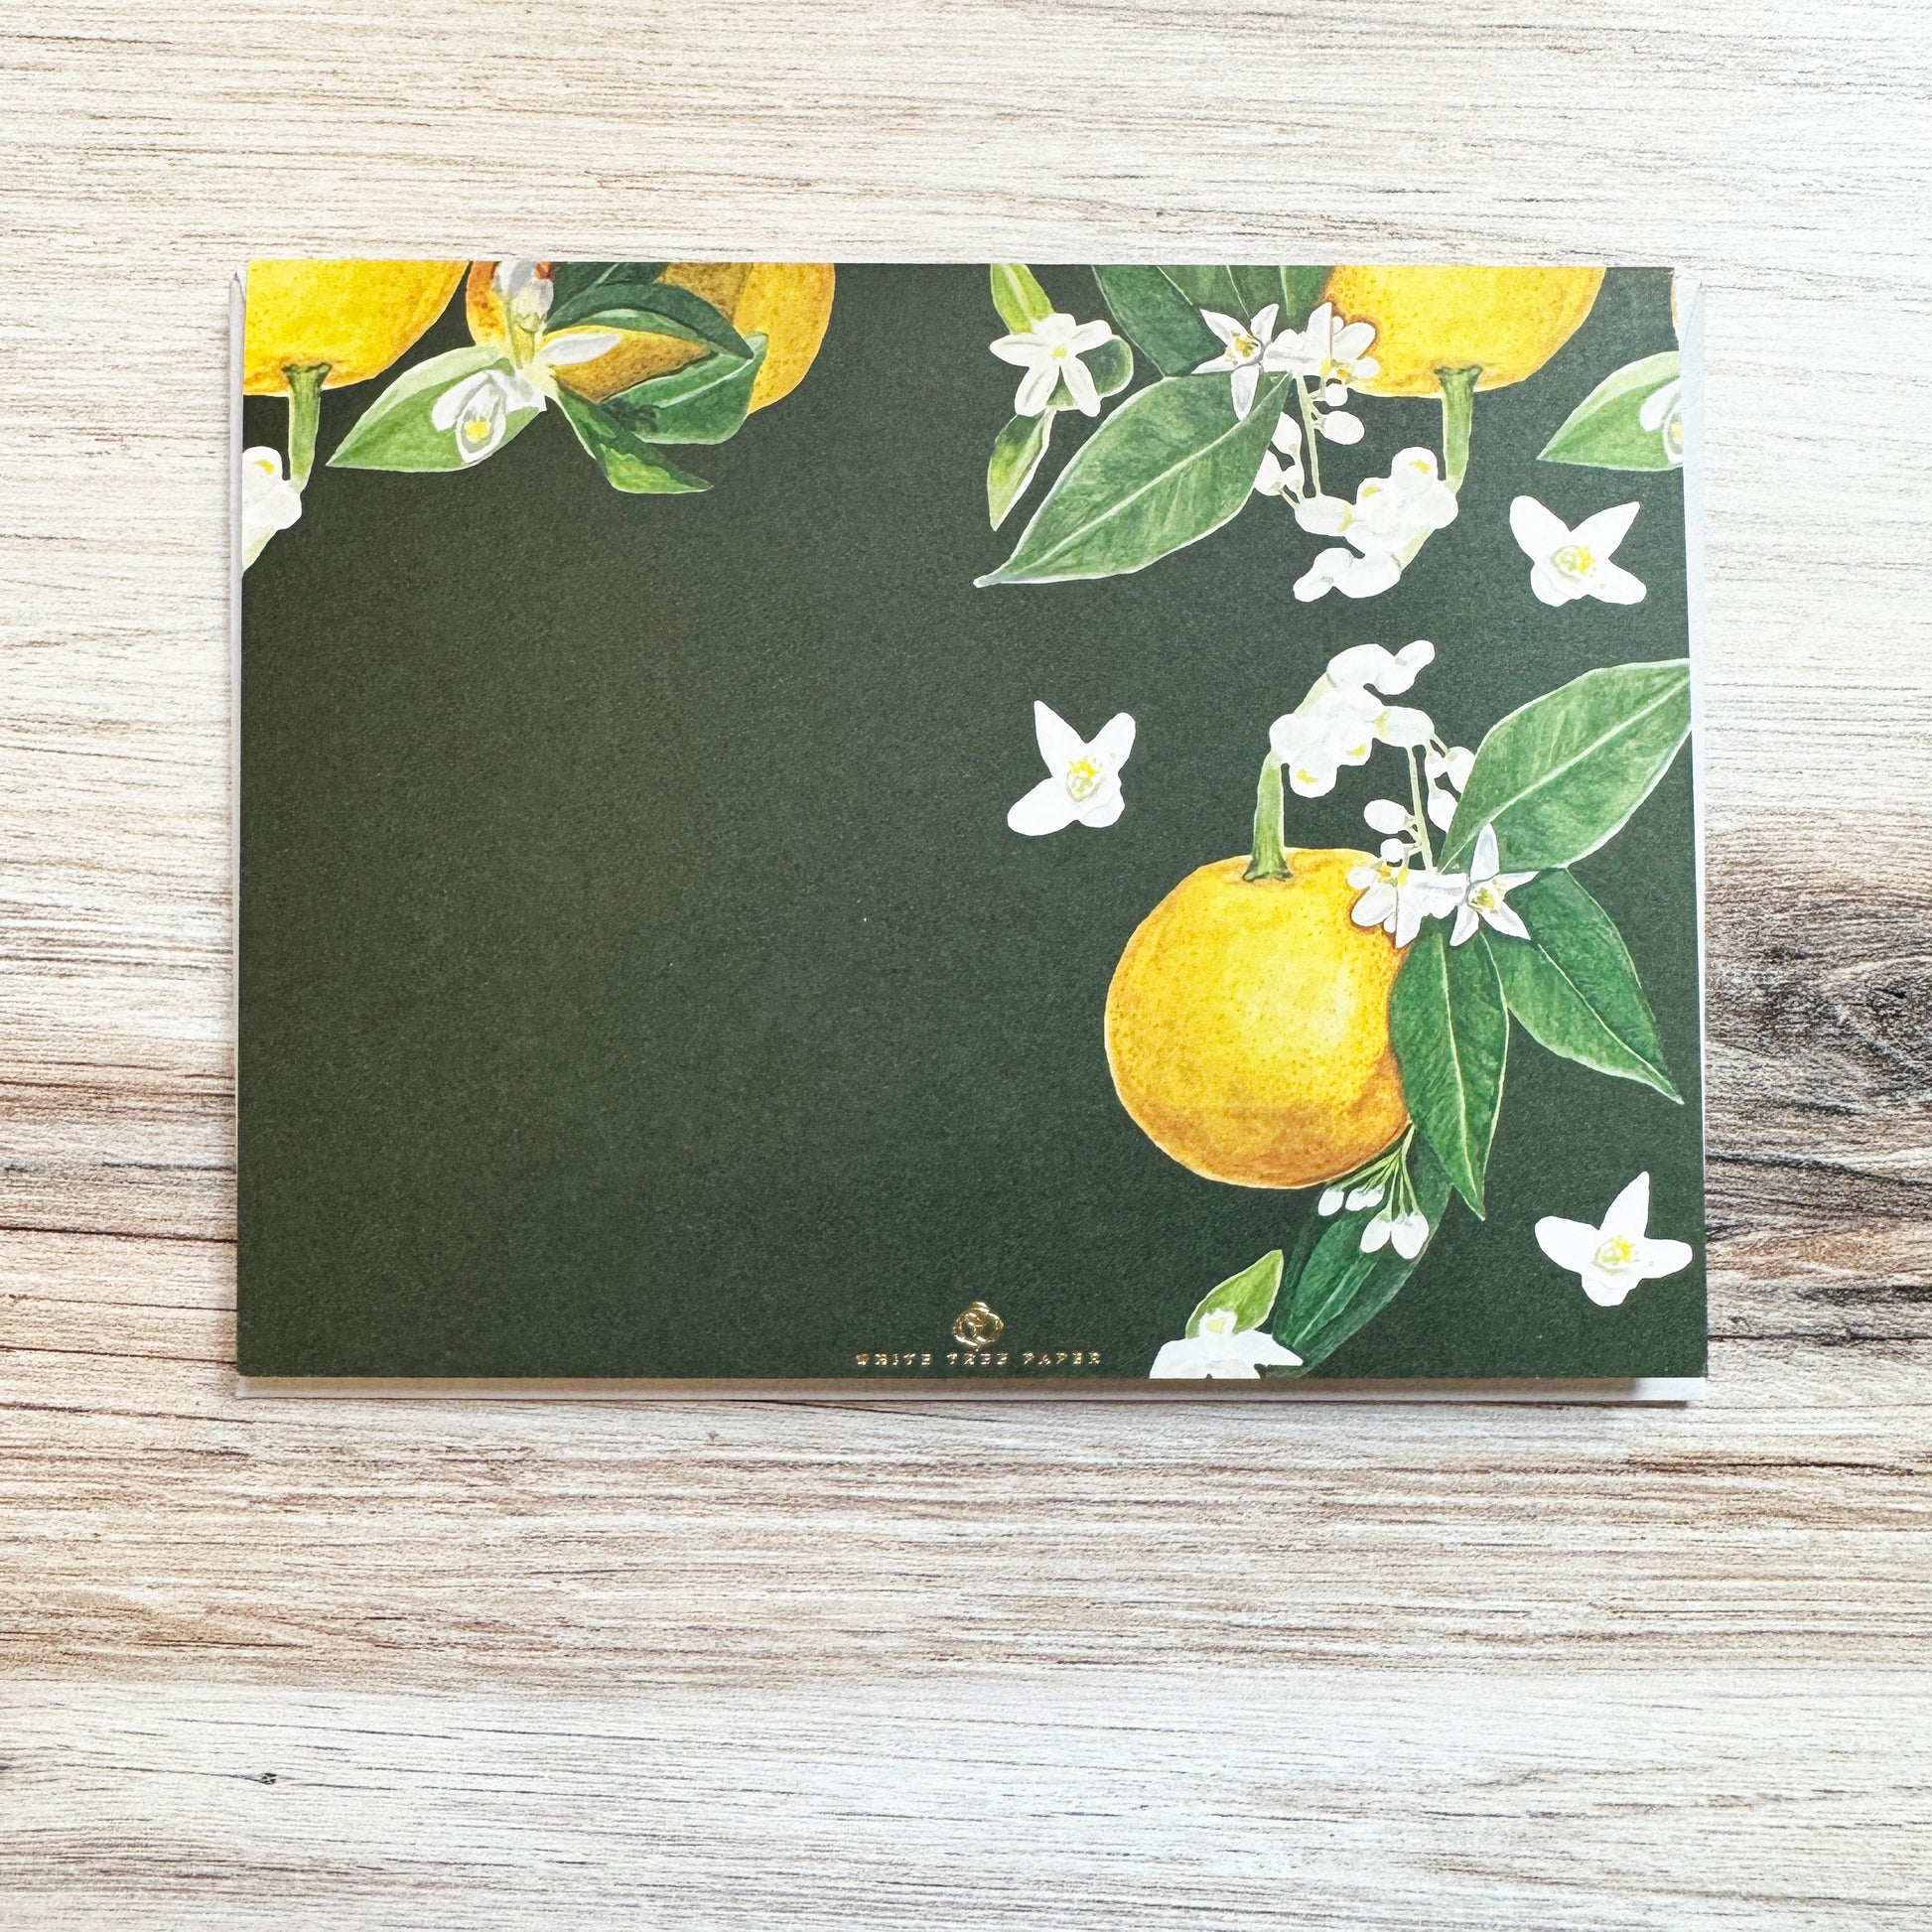 Set of 6 folded full color gold foil stamped cards with dark green background and watercolor painted orange blossom flowers and oranges in foreground, blank inside. 6 luxe gray envelopes. Pictured here is back of card design and White Tree Paper logo.